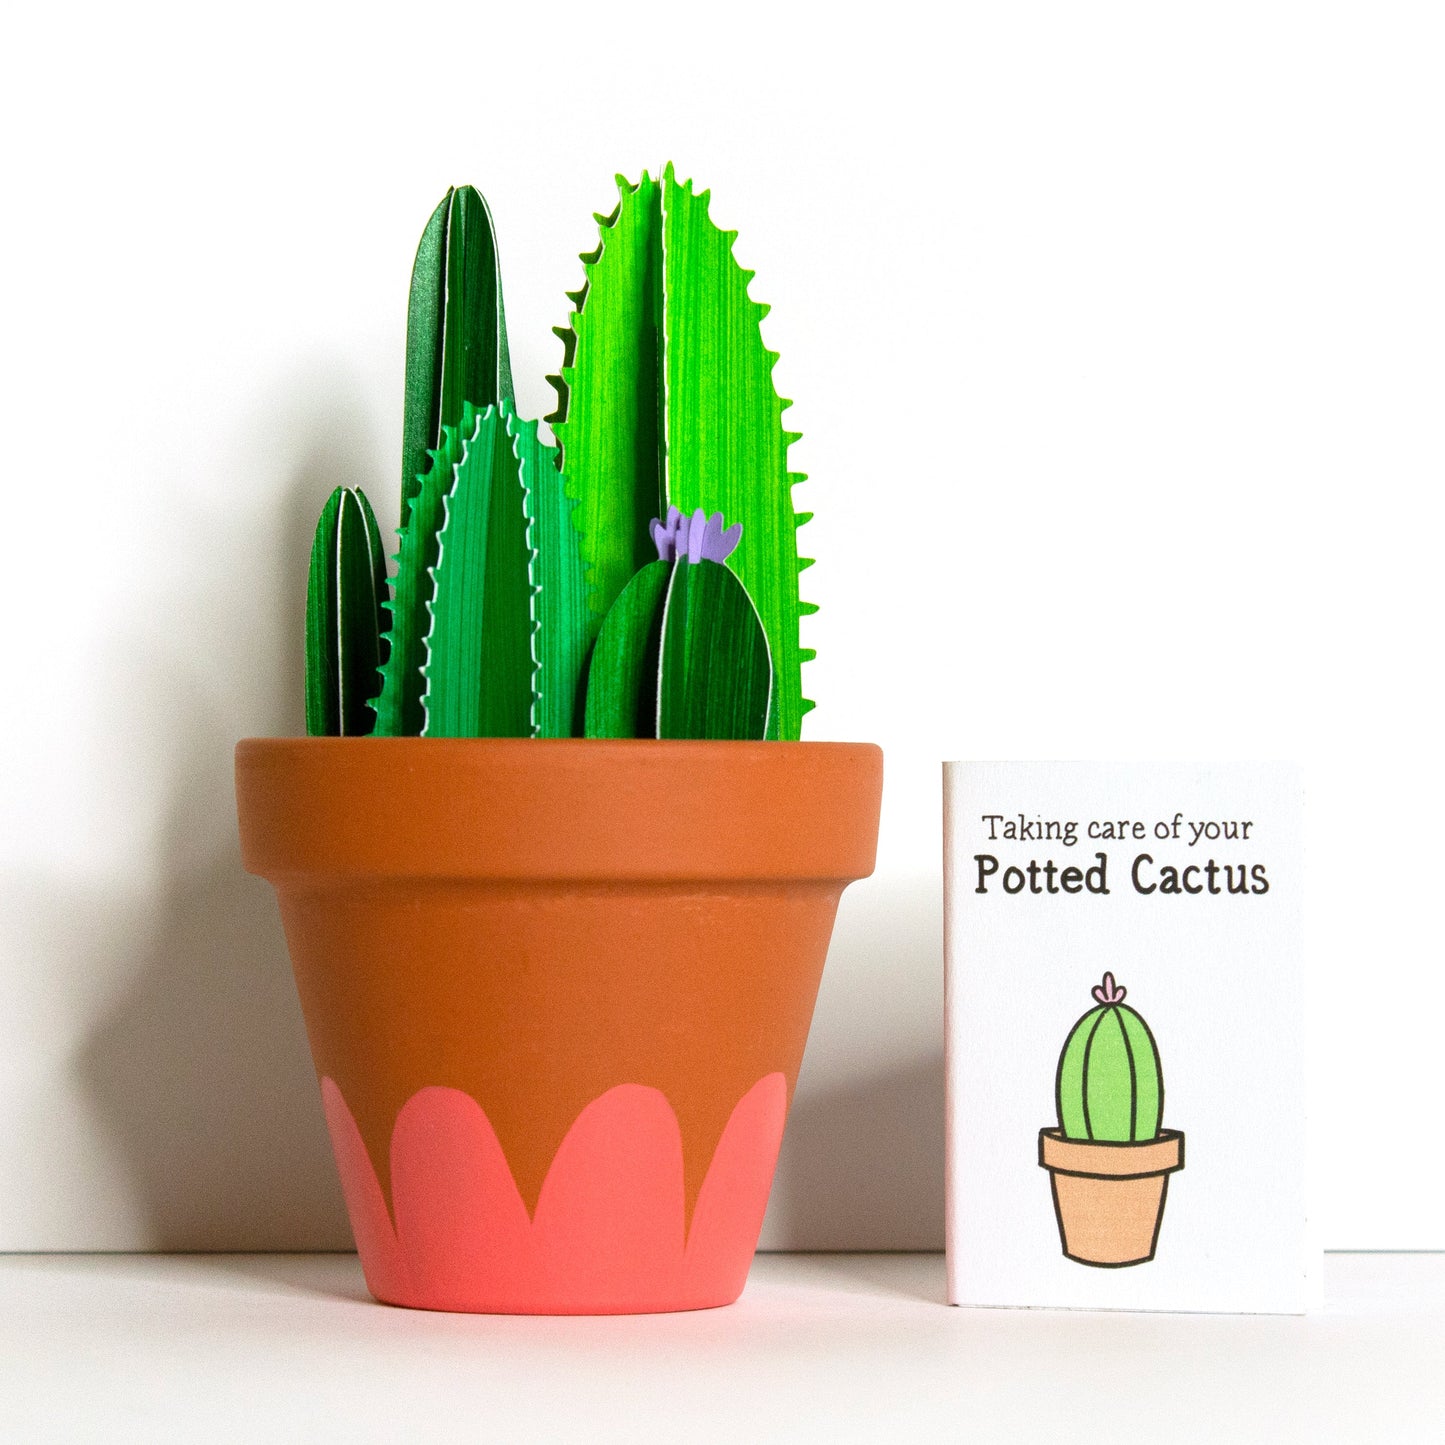 Cute bunch of green 3D paper cacti in terracotta pot with care instructions.